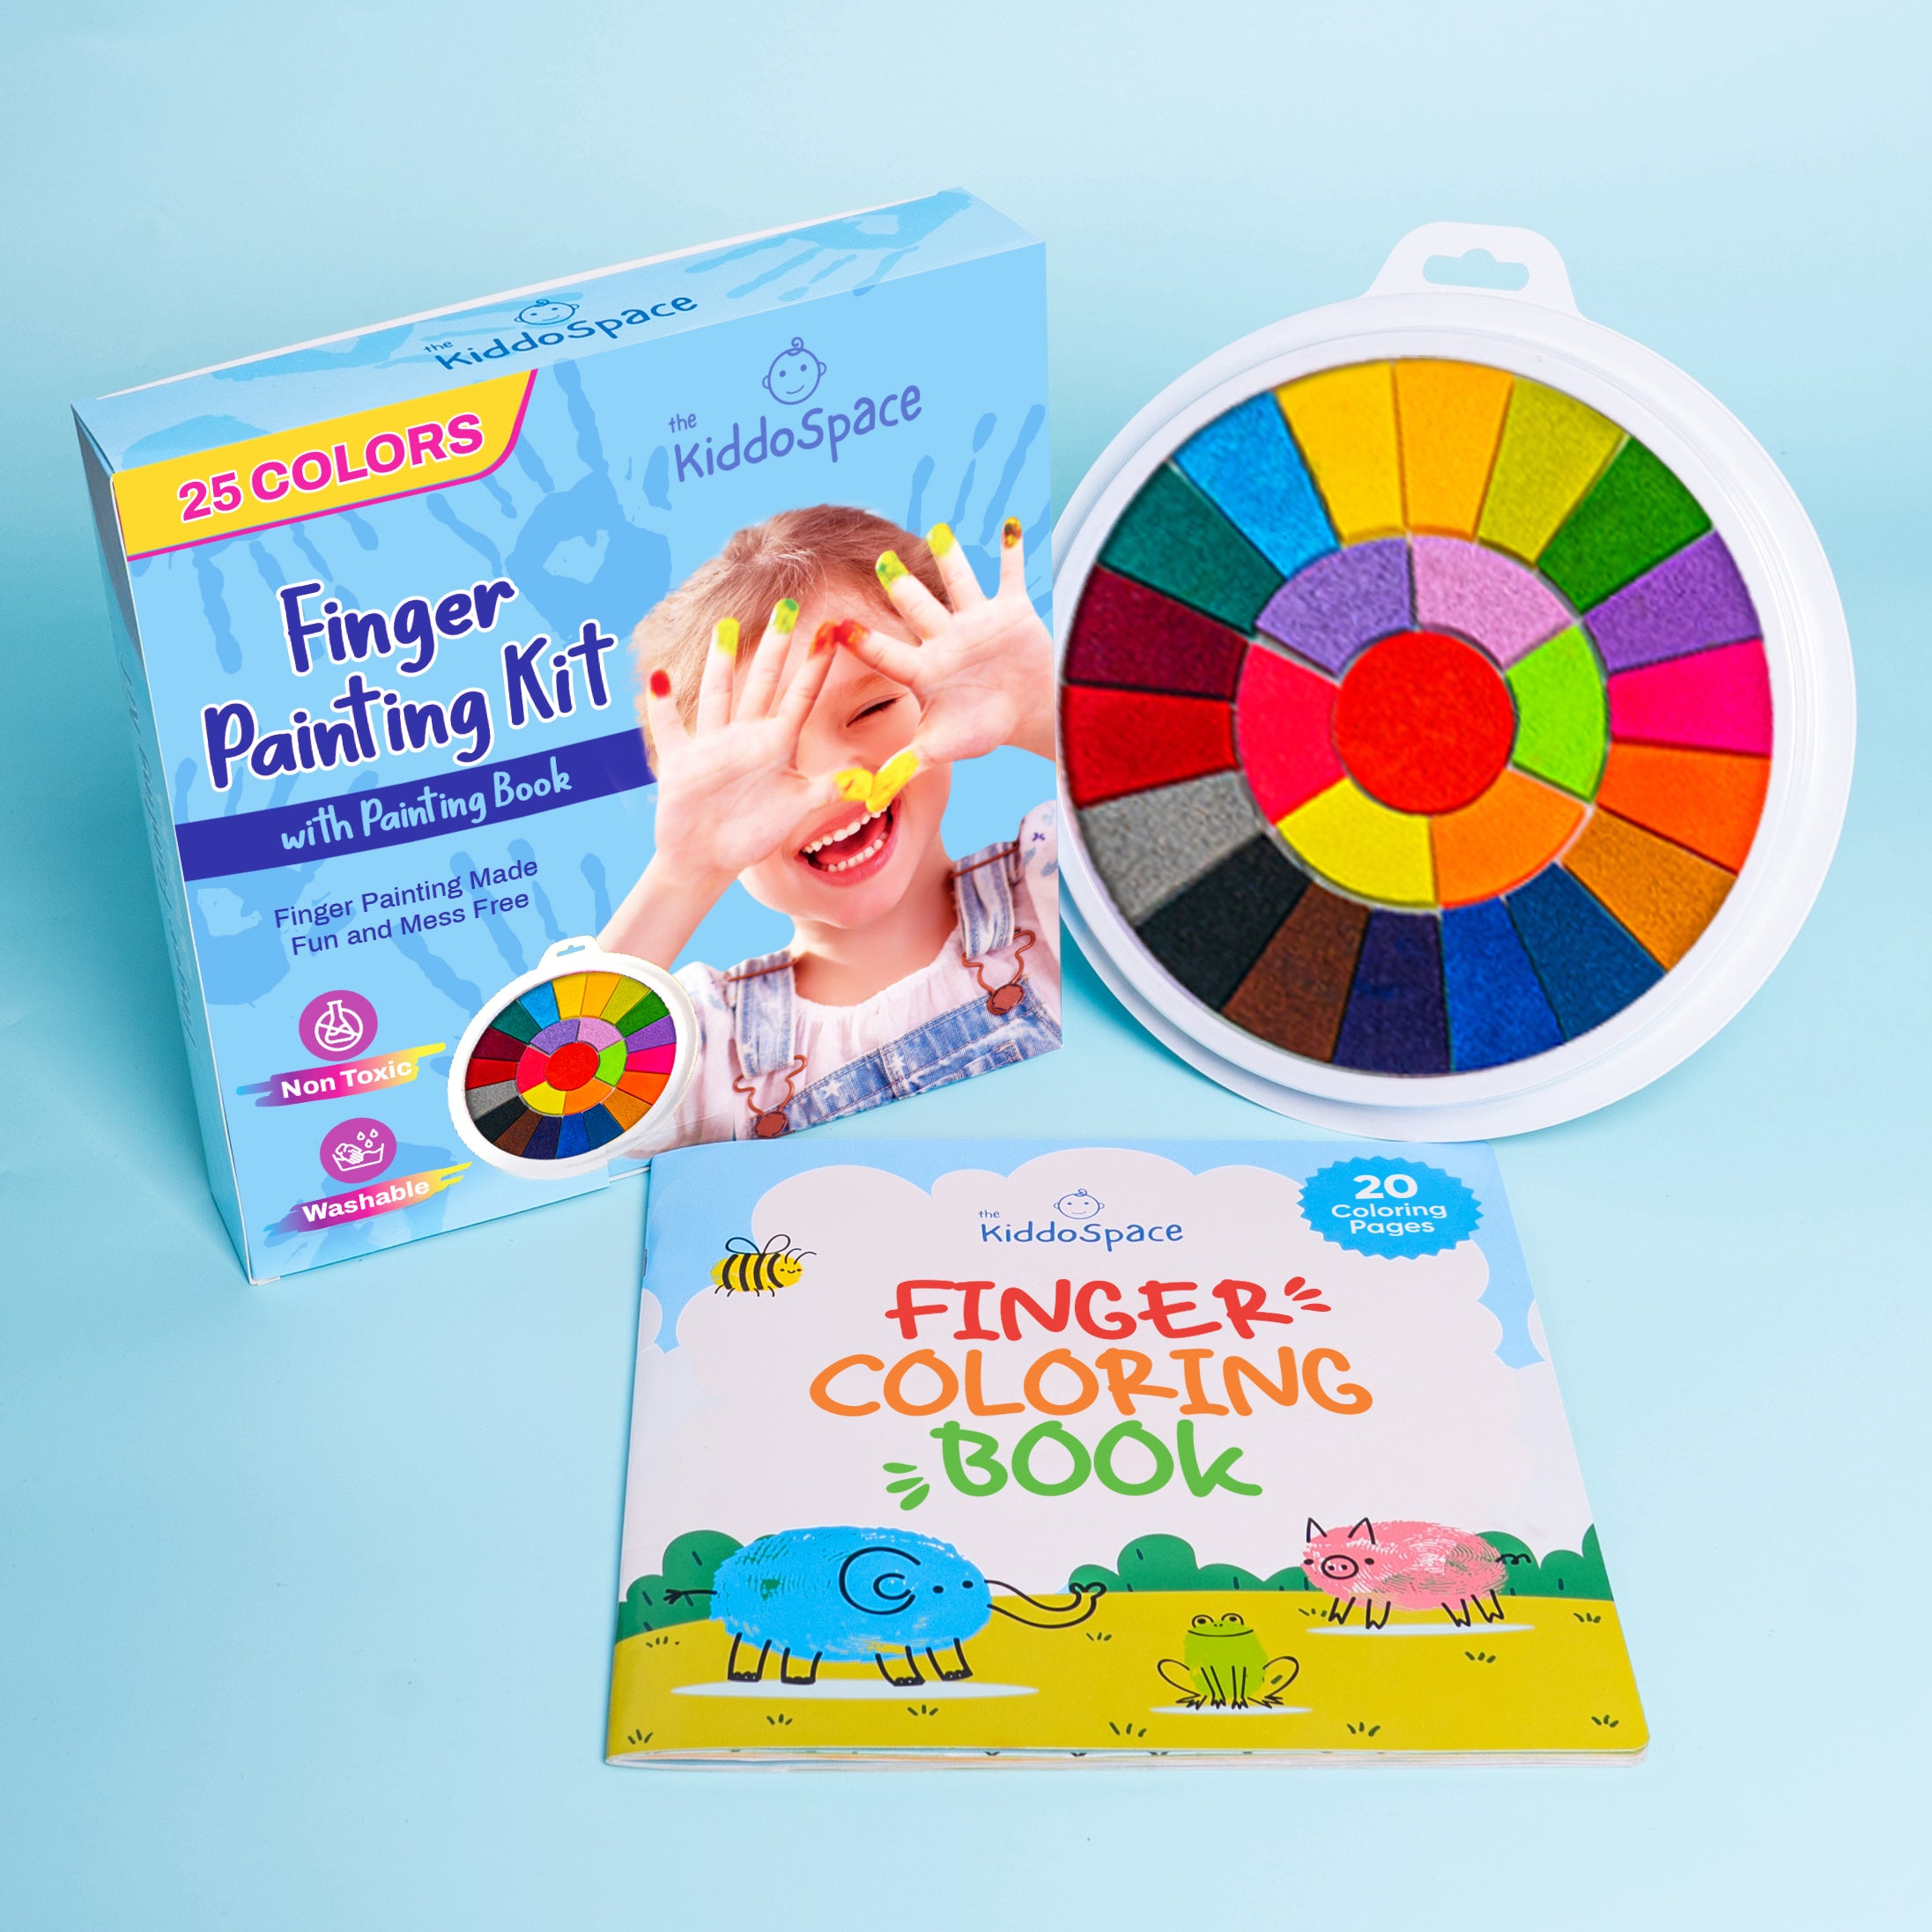 Kiddospace’s Finger Painting Kit - Let your child express their creativity mess-free